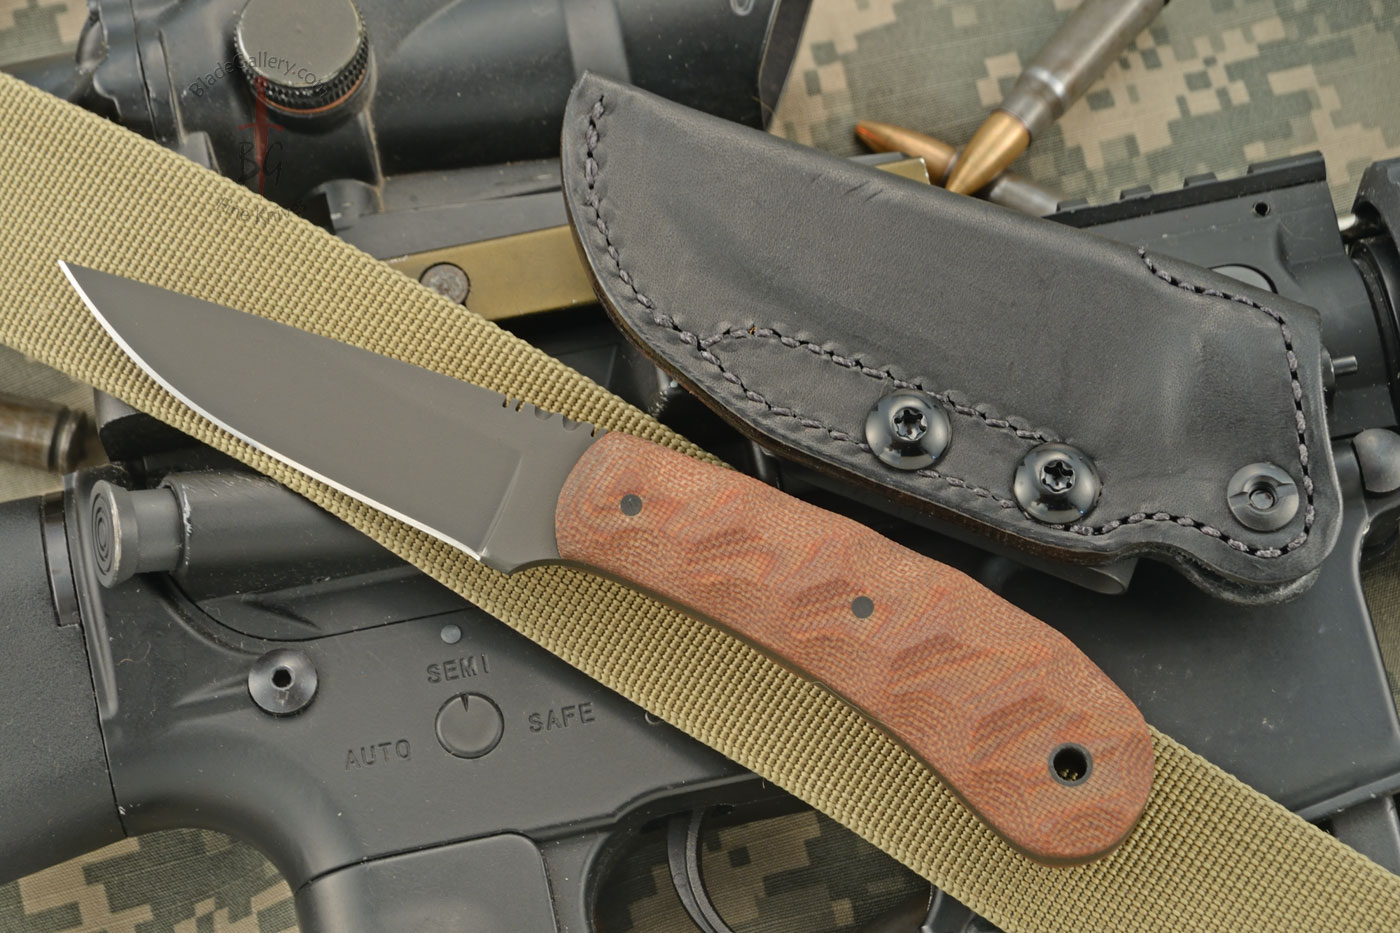 Standard Duty 2 (SD2) with Sculpted Tan Laminate